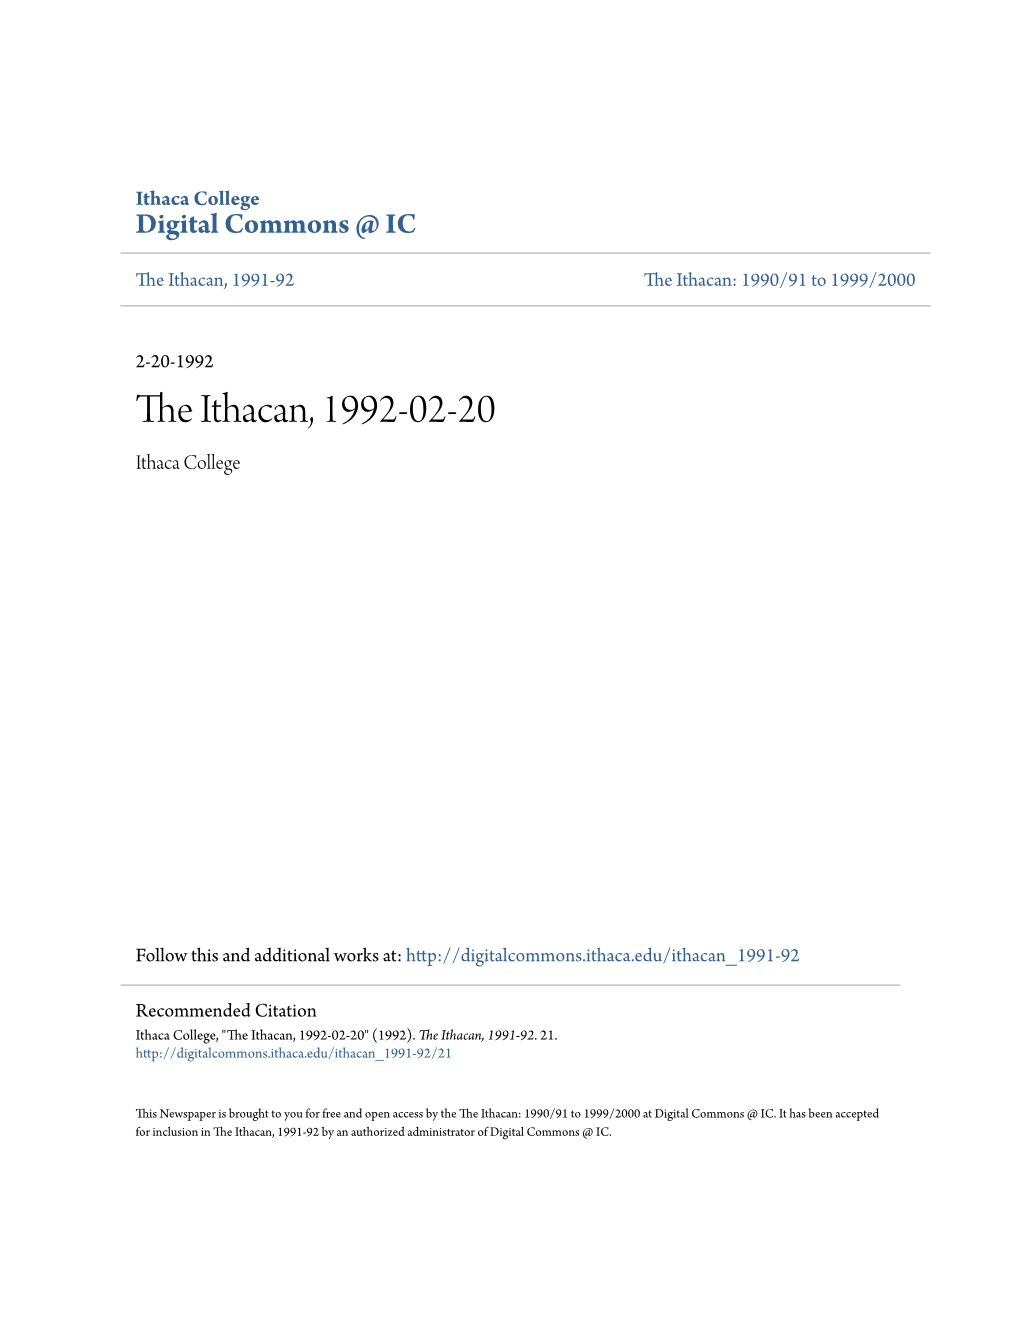 The Ithacan, 1992-02-20